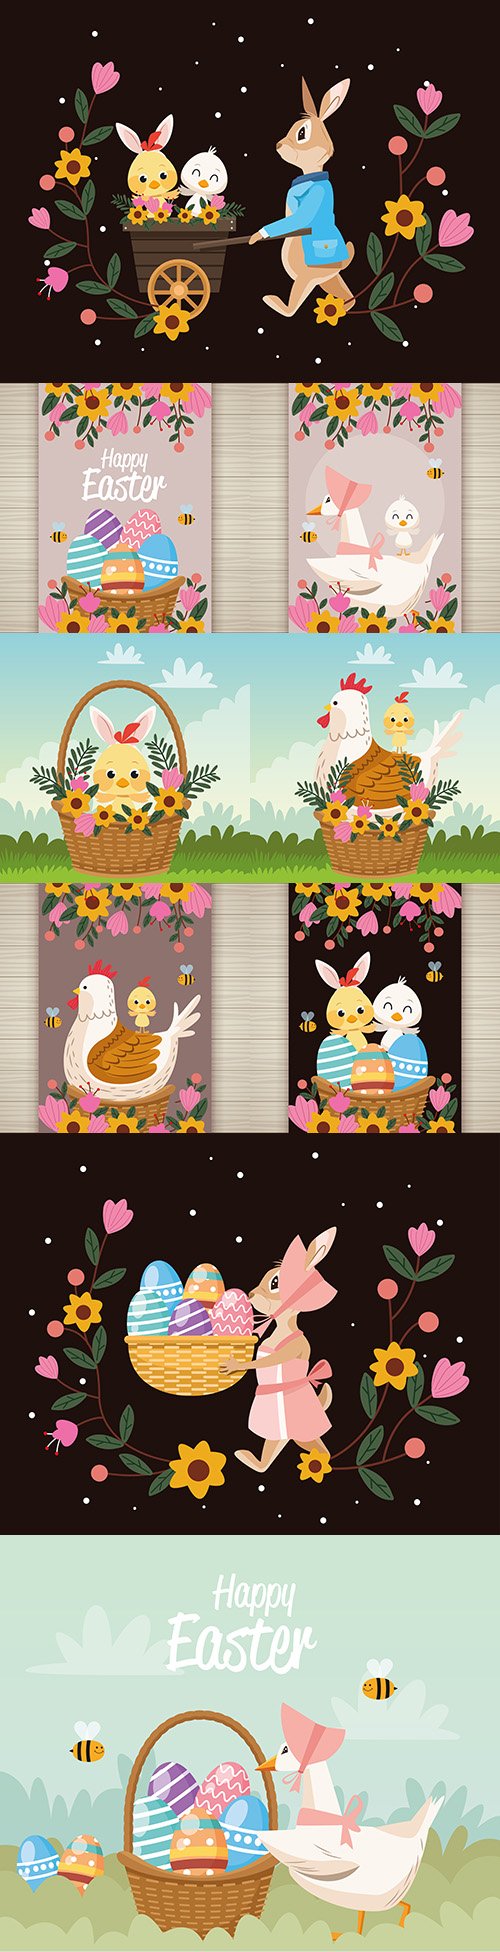 Easter postcard with duck and eggs in basket